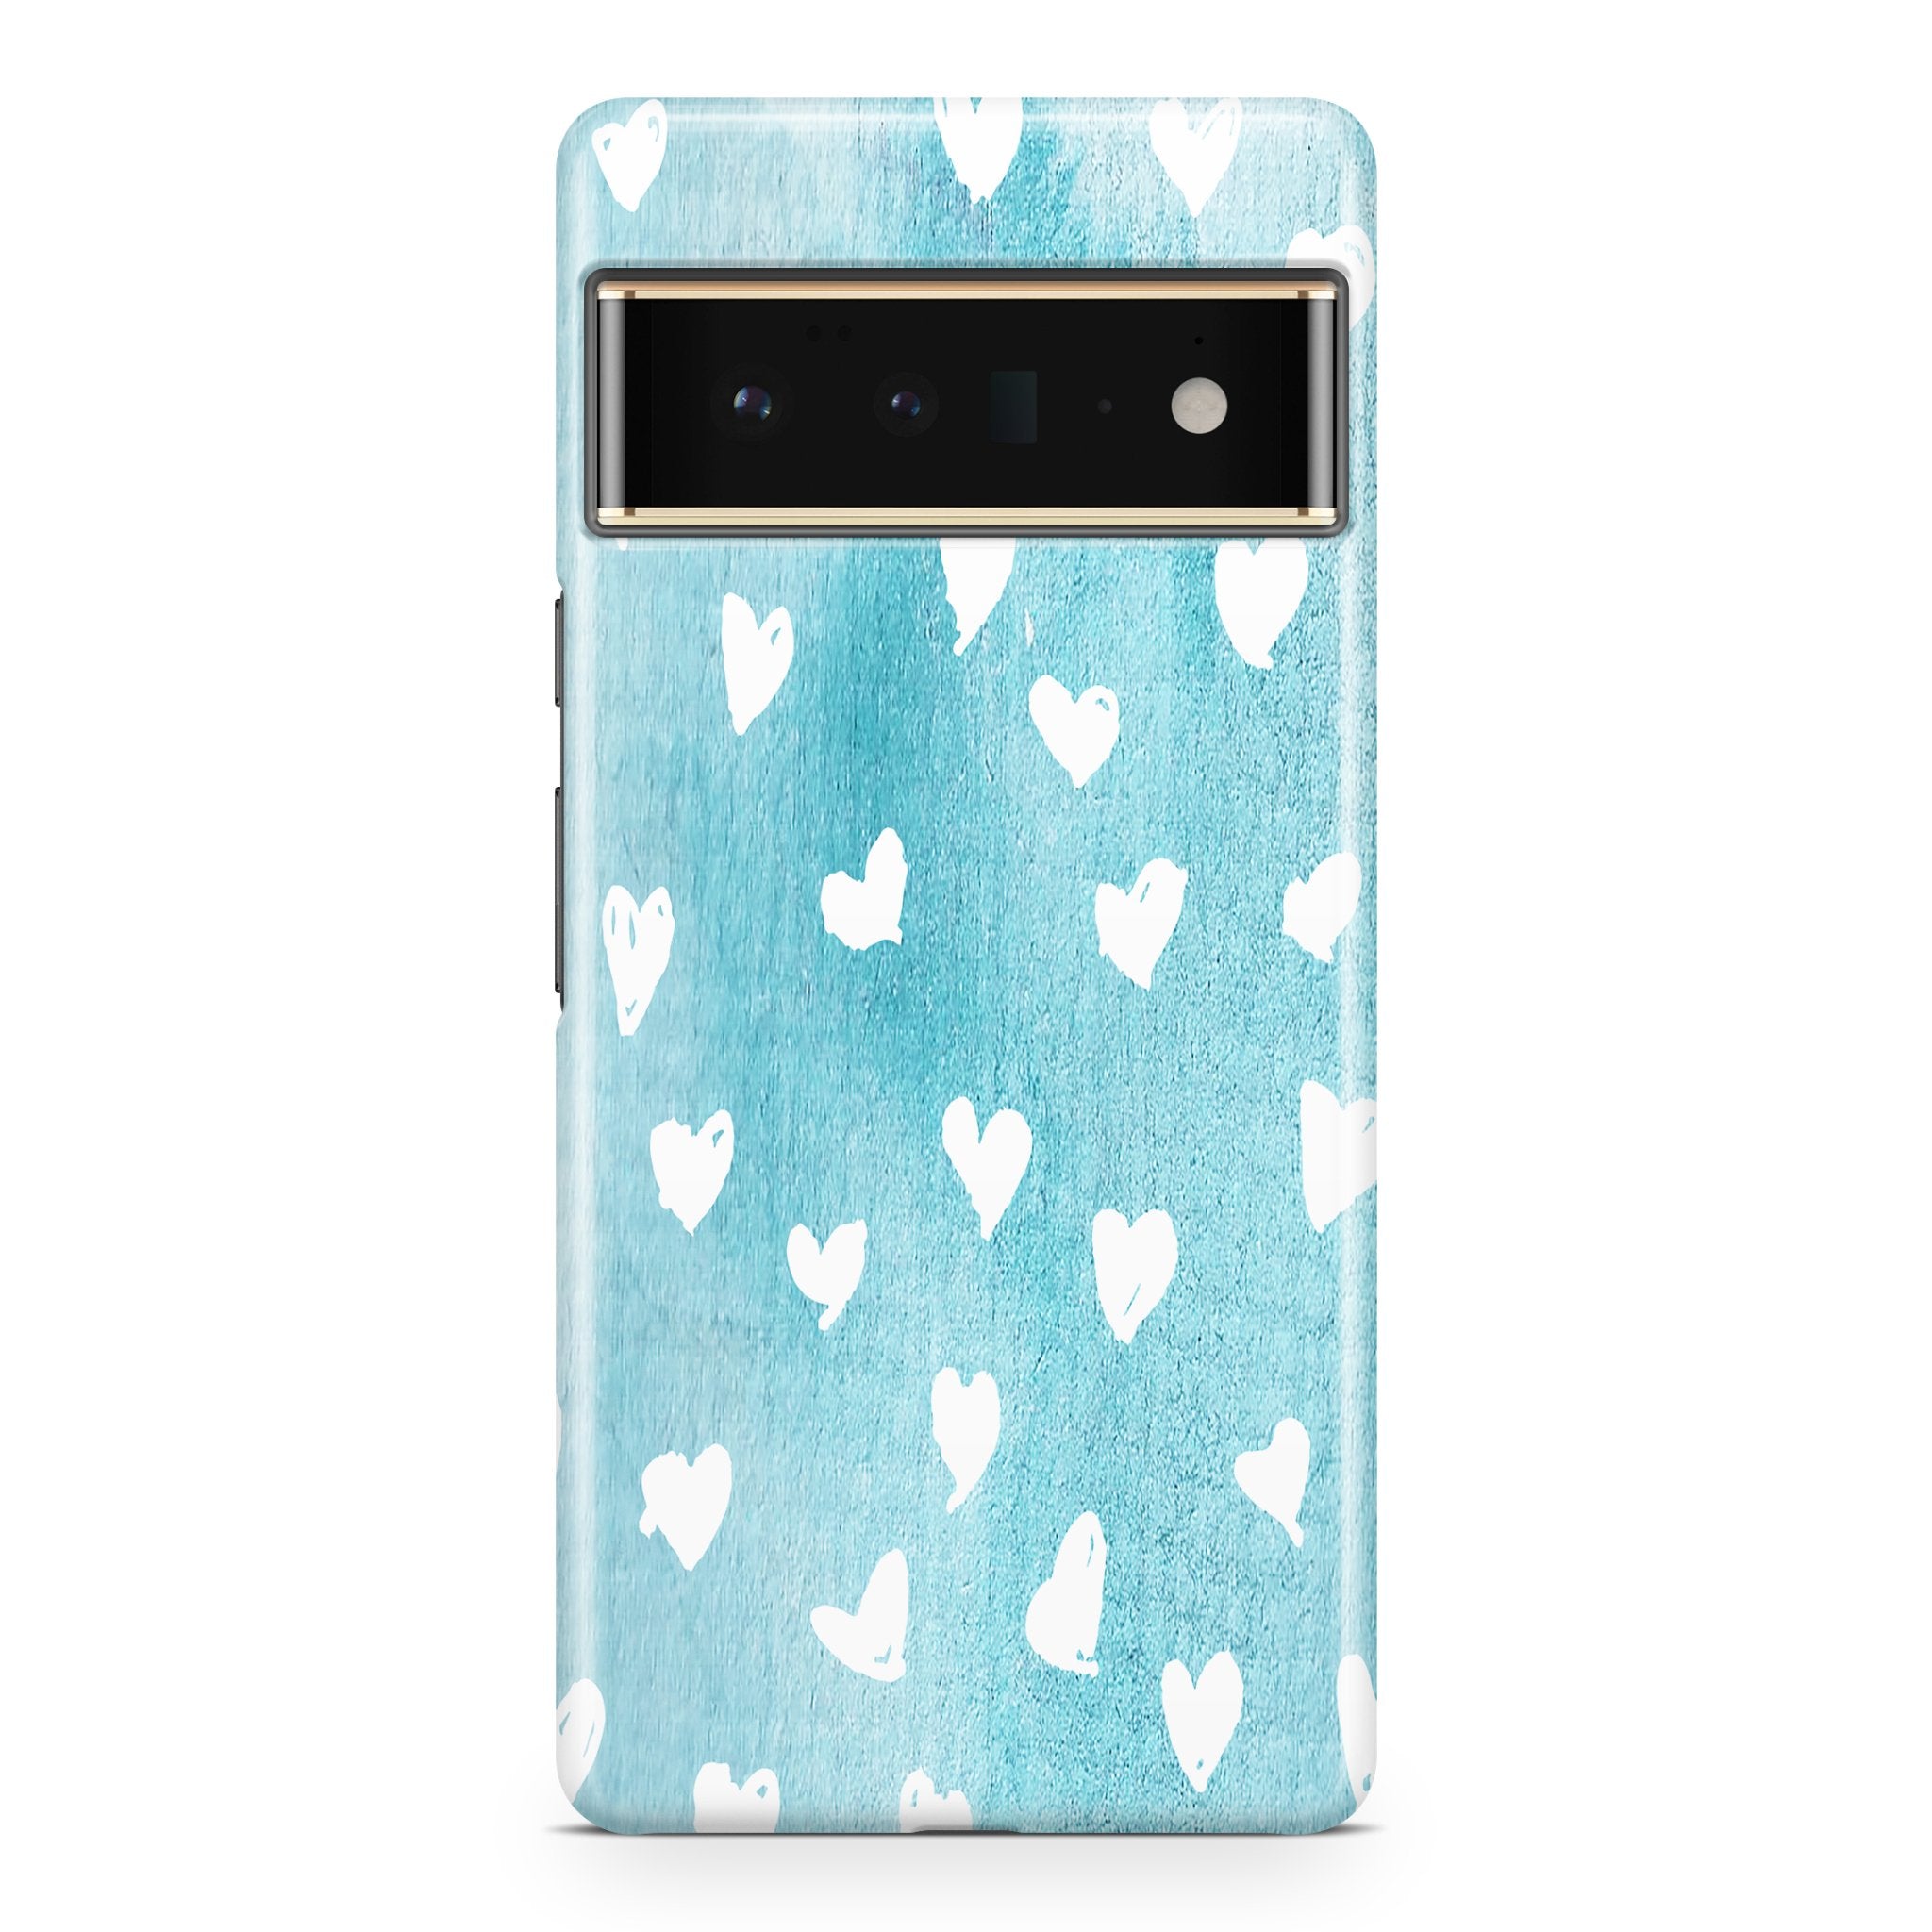 Blue Heart - Google phone case designs by CaseSwagger